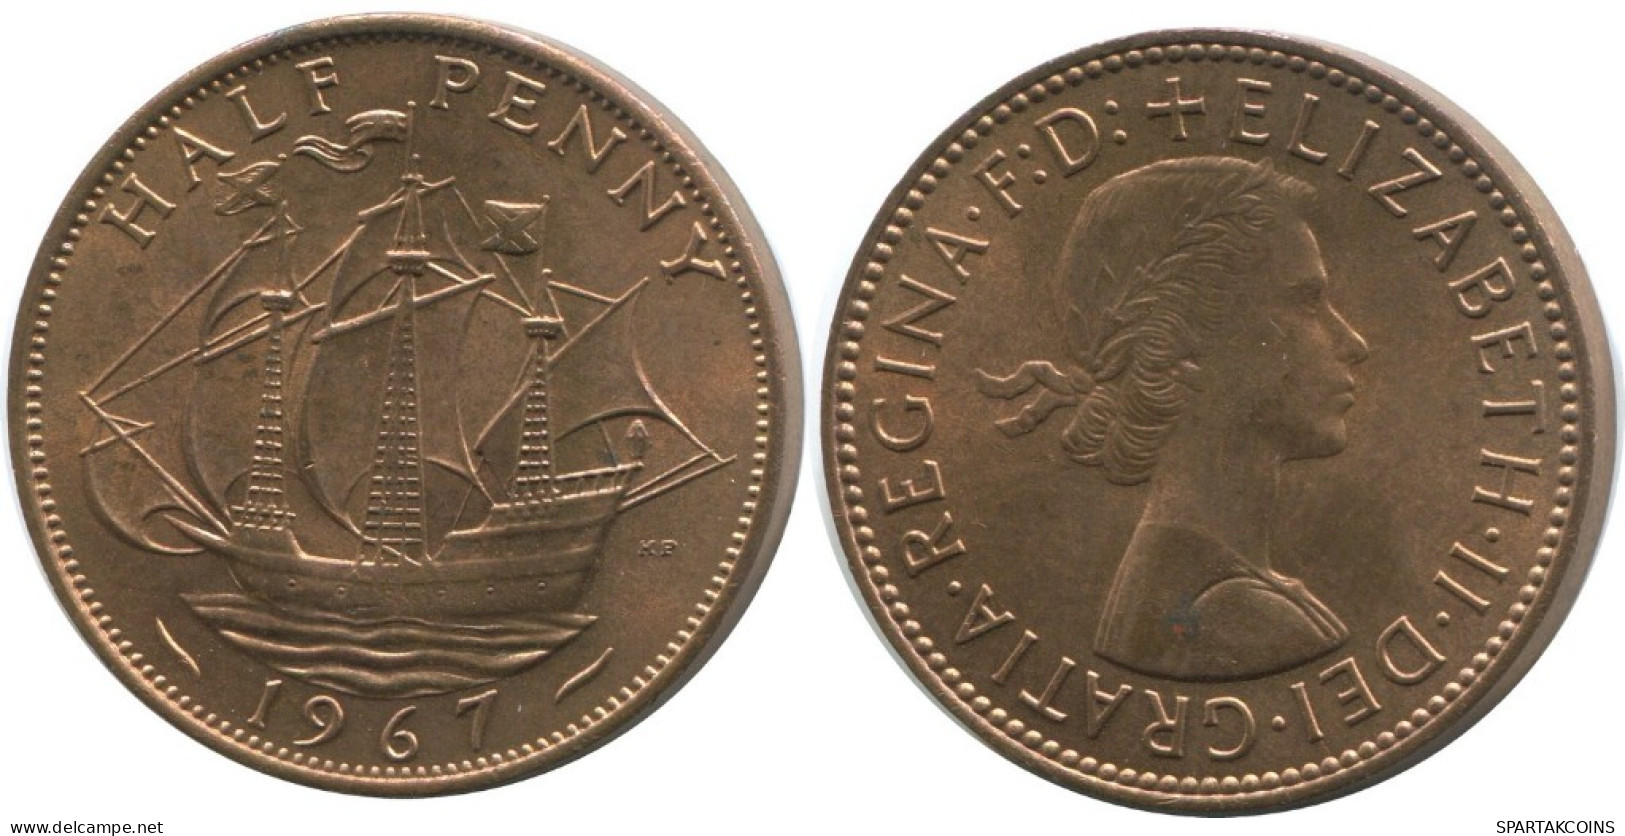 HALF PENNY 1967 UK GREAT BRITAIN Coin #AG842.1.U.A - C. 1/2 Penny